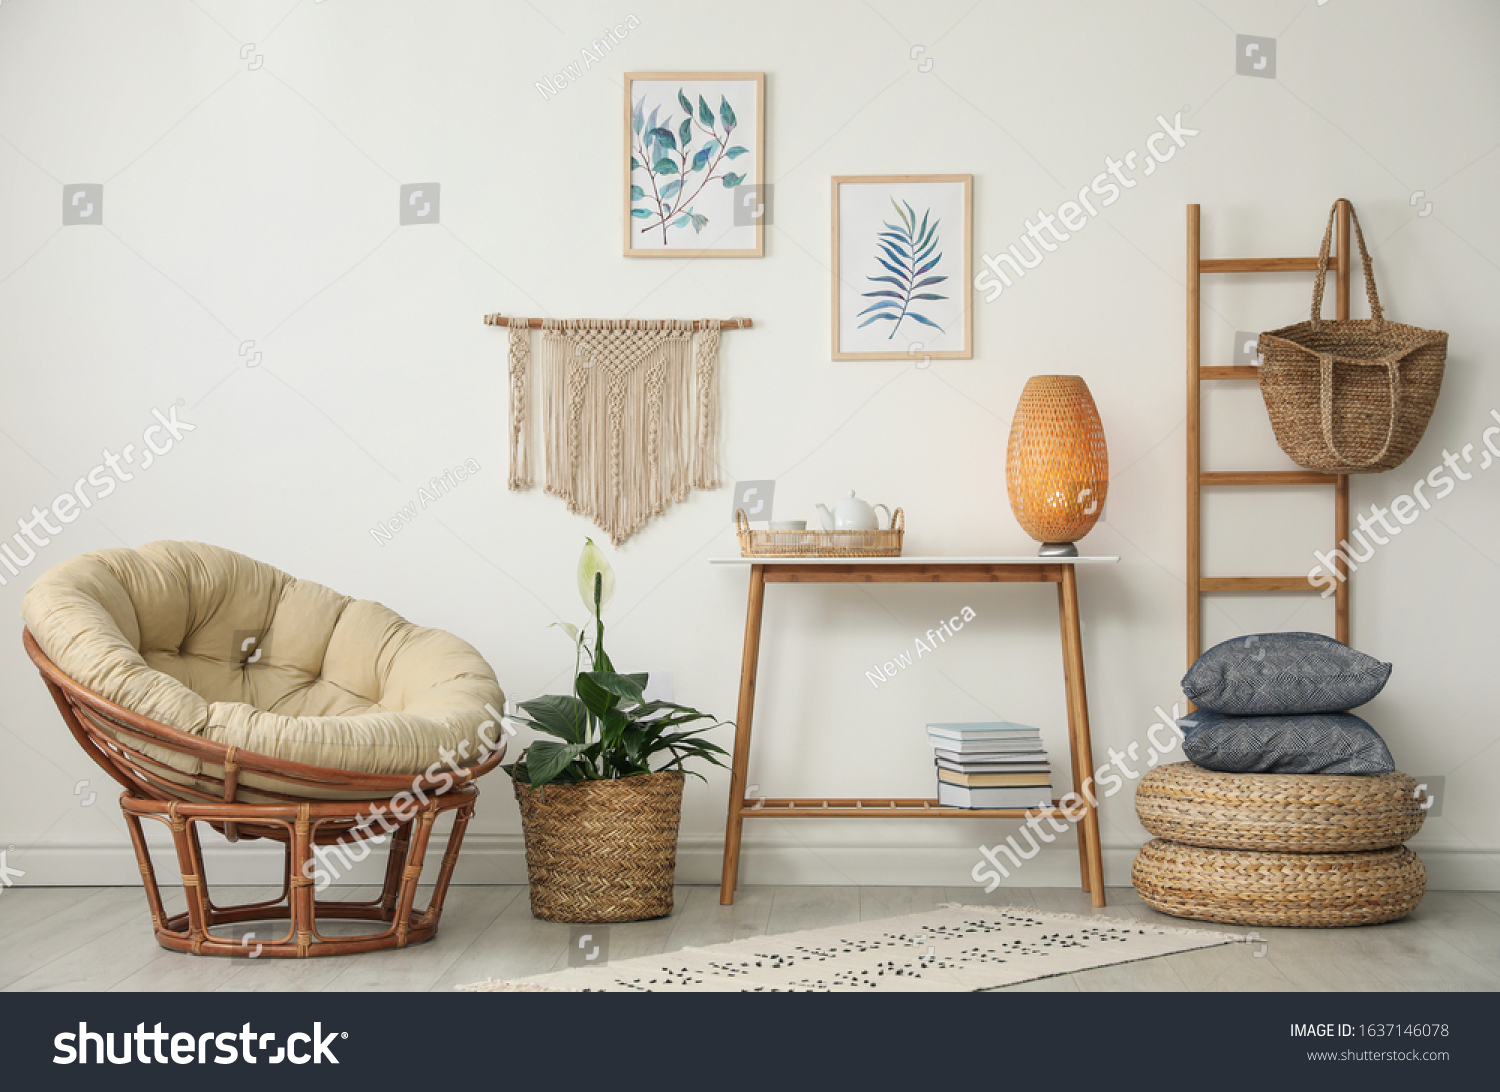 Living room interior design with comfortable papasan chair and wooden table #1637146078